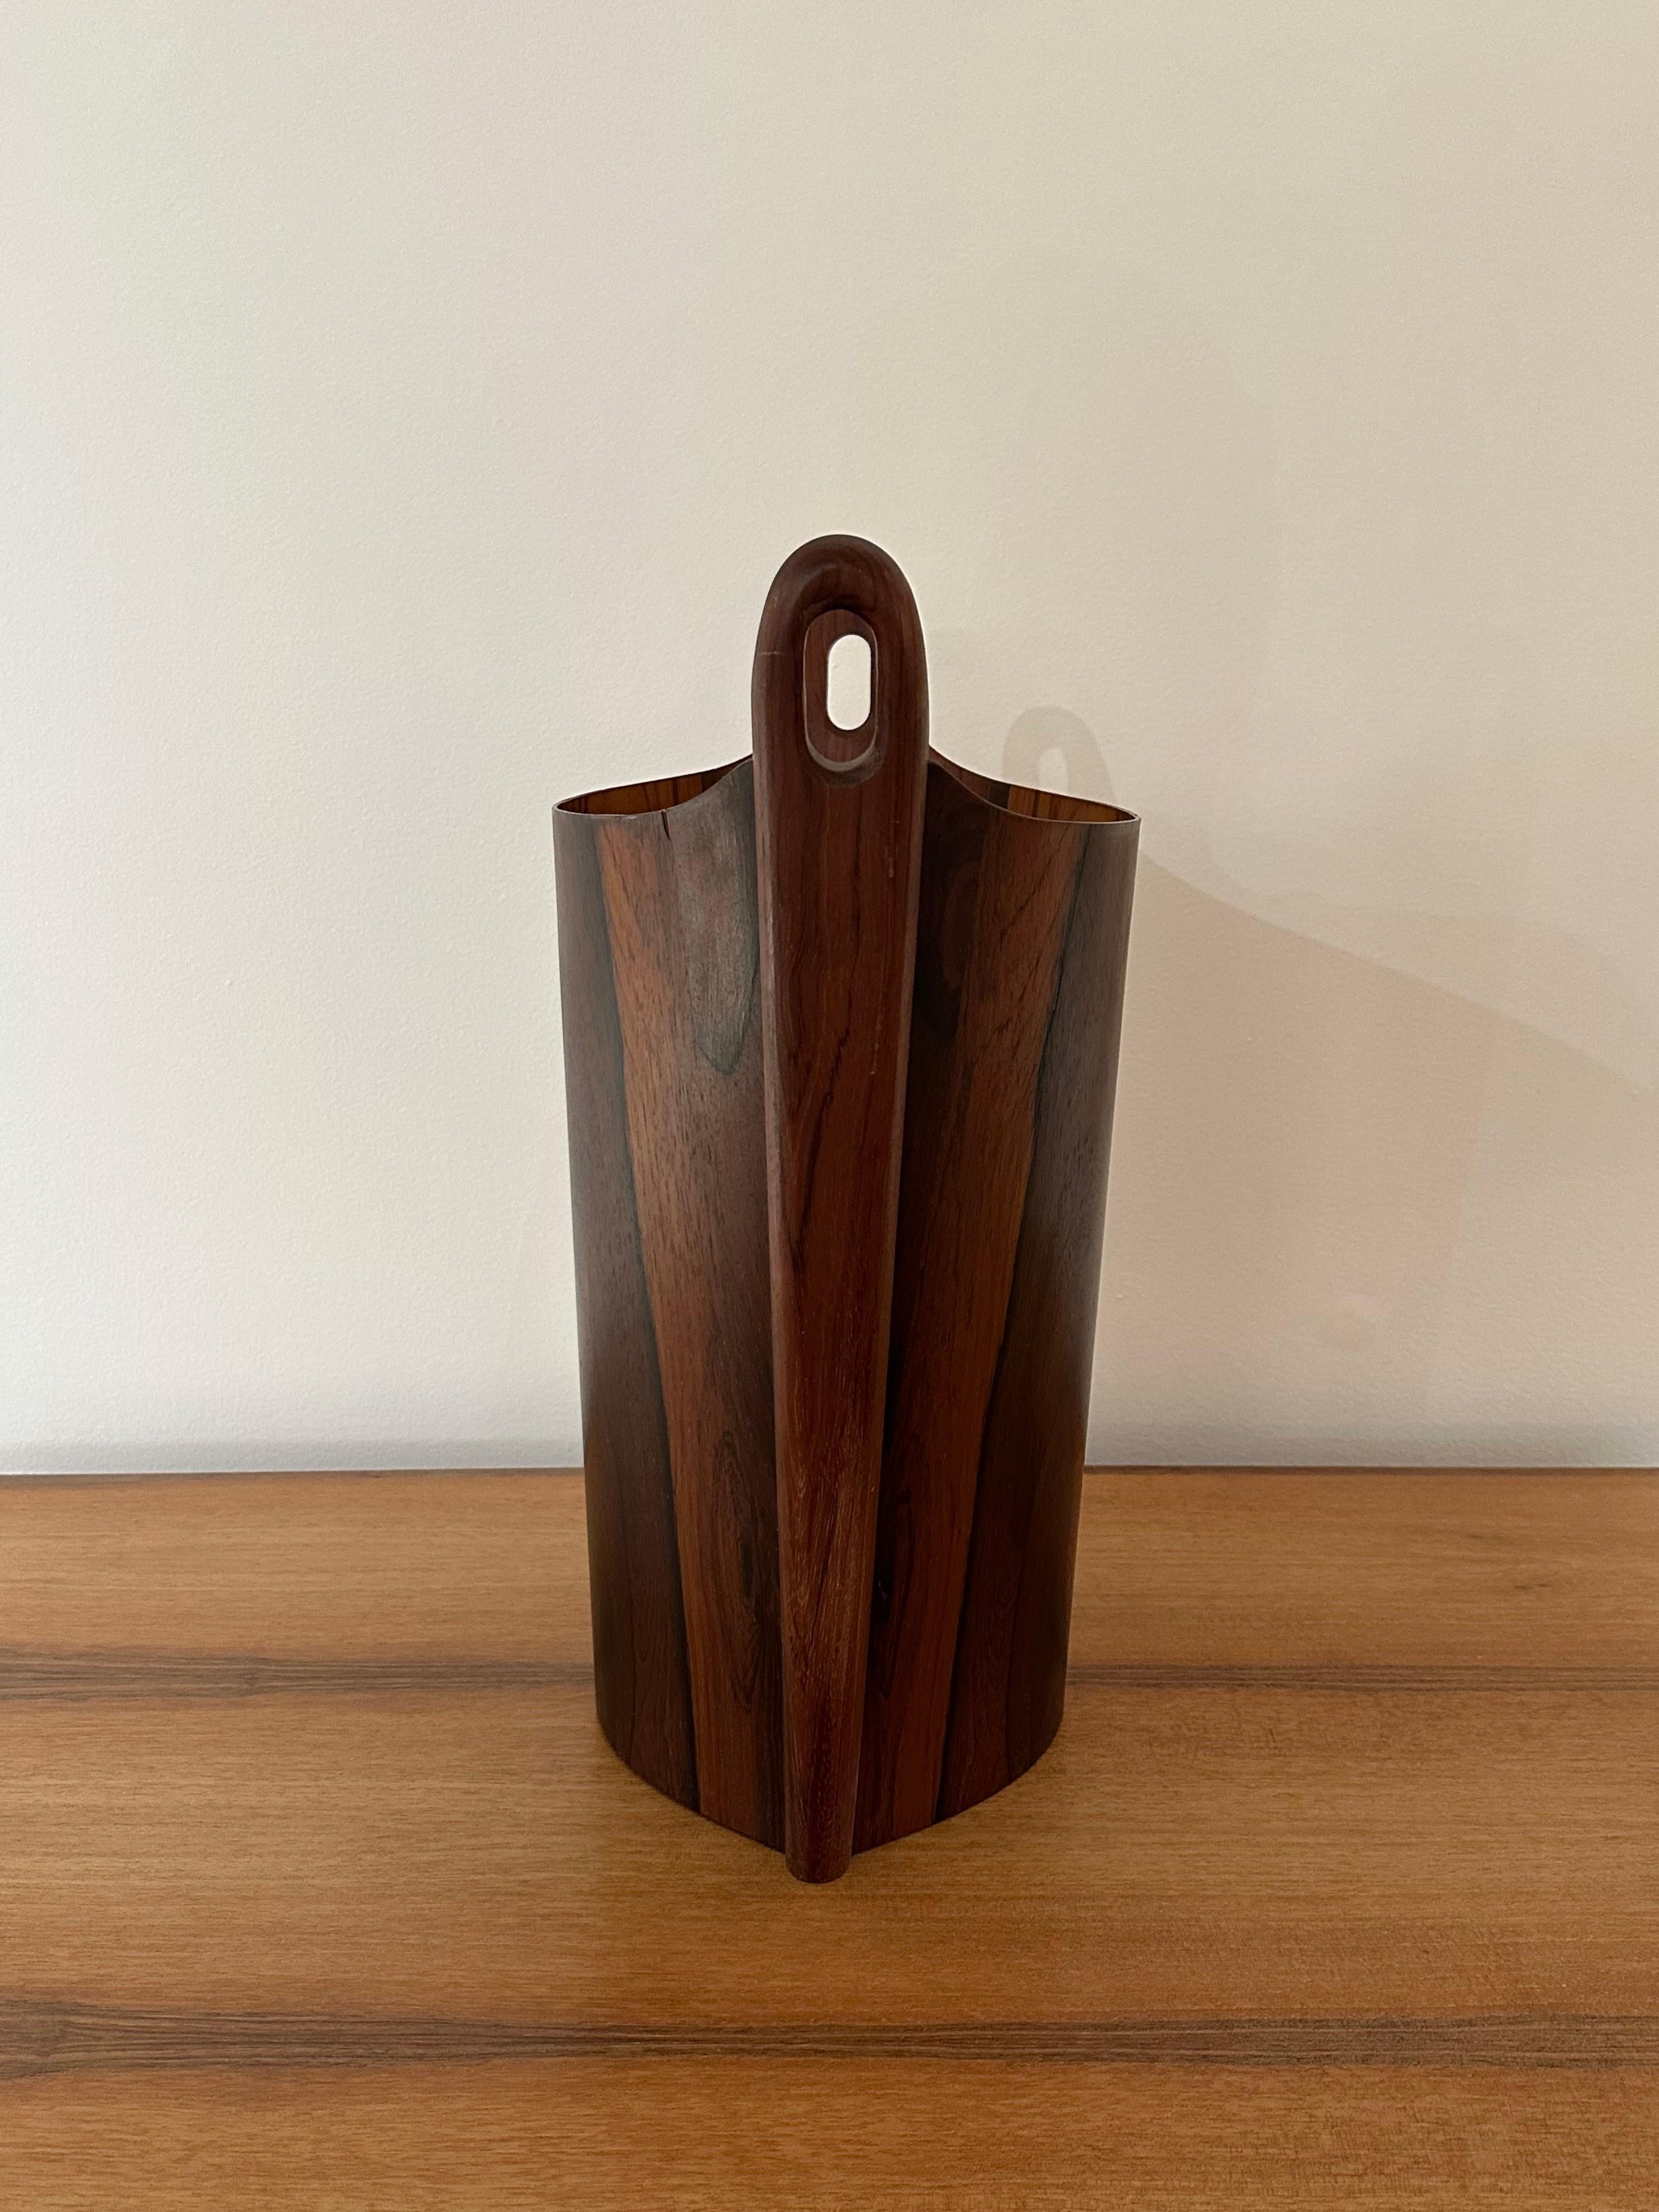 Danish modern waste can, designed by Einar Barnes for P.S. Heggen, Norway, circa 1960s. Rich patterned rosewood. Signed with branded manufacturer's mark to the interiors [P.S. Heggen Nordfjordeid Made in Norway]. 